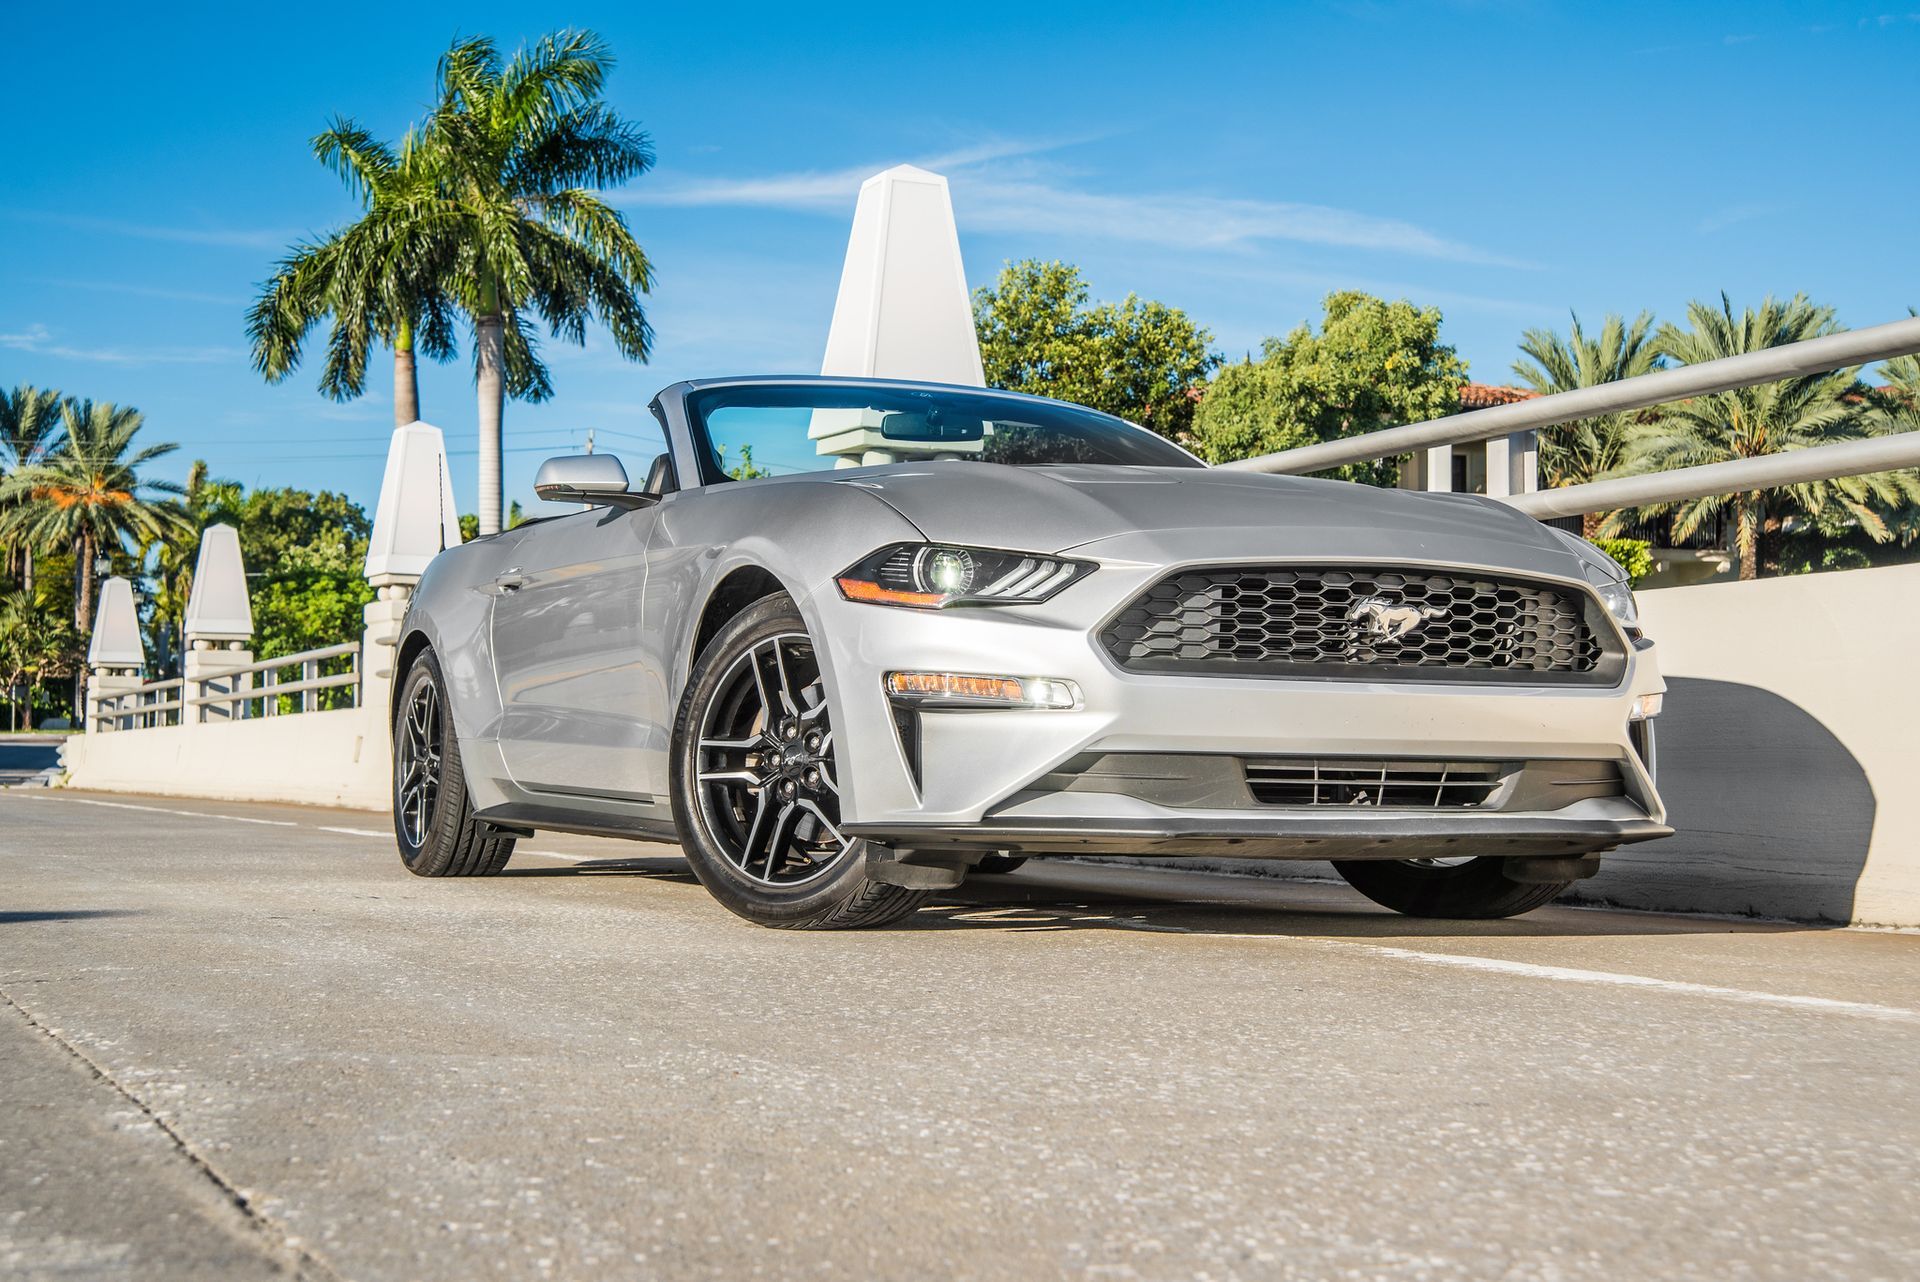 Ford Mustang Silver Rental